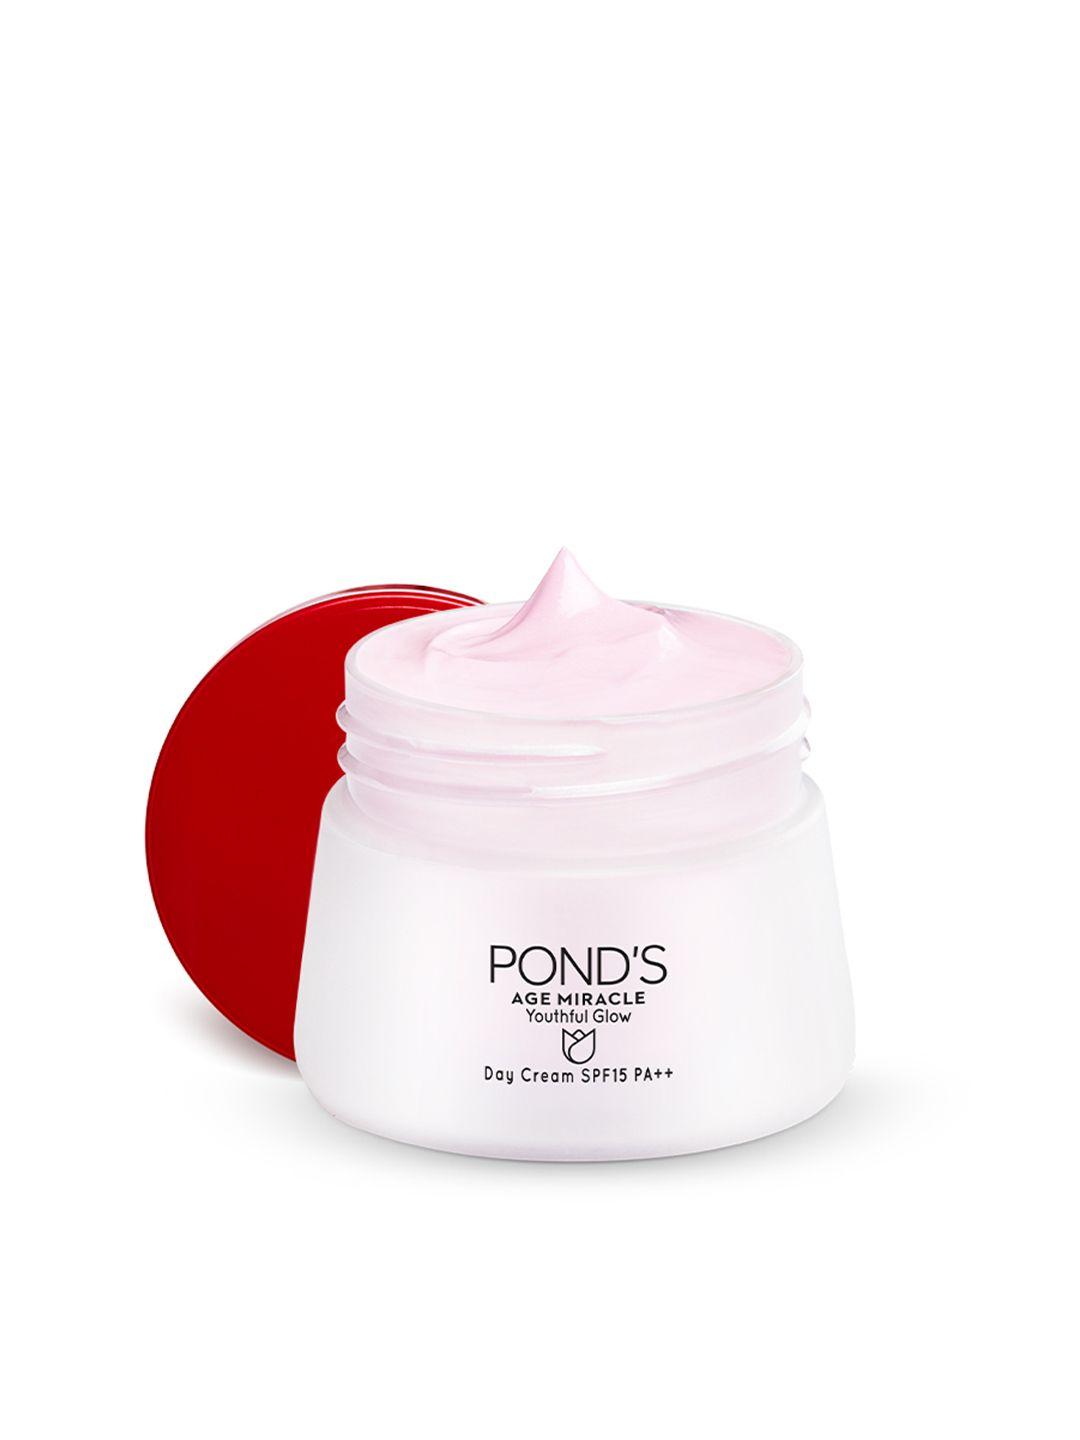 pond's-age-miracle-wrinkle-corrector-spf-18-pa++-day-cream-10-gm